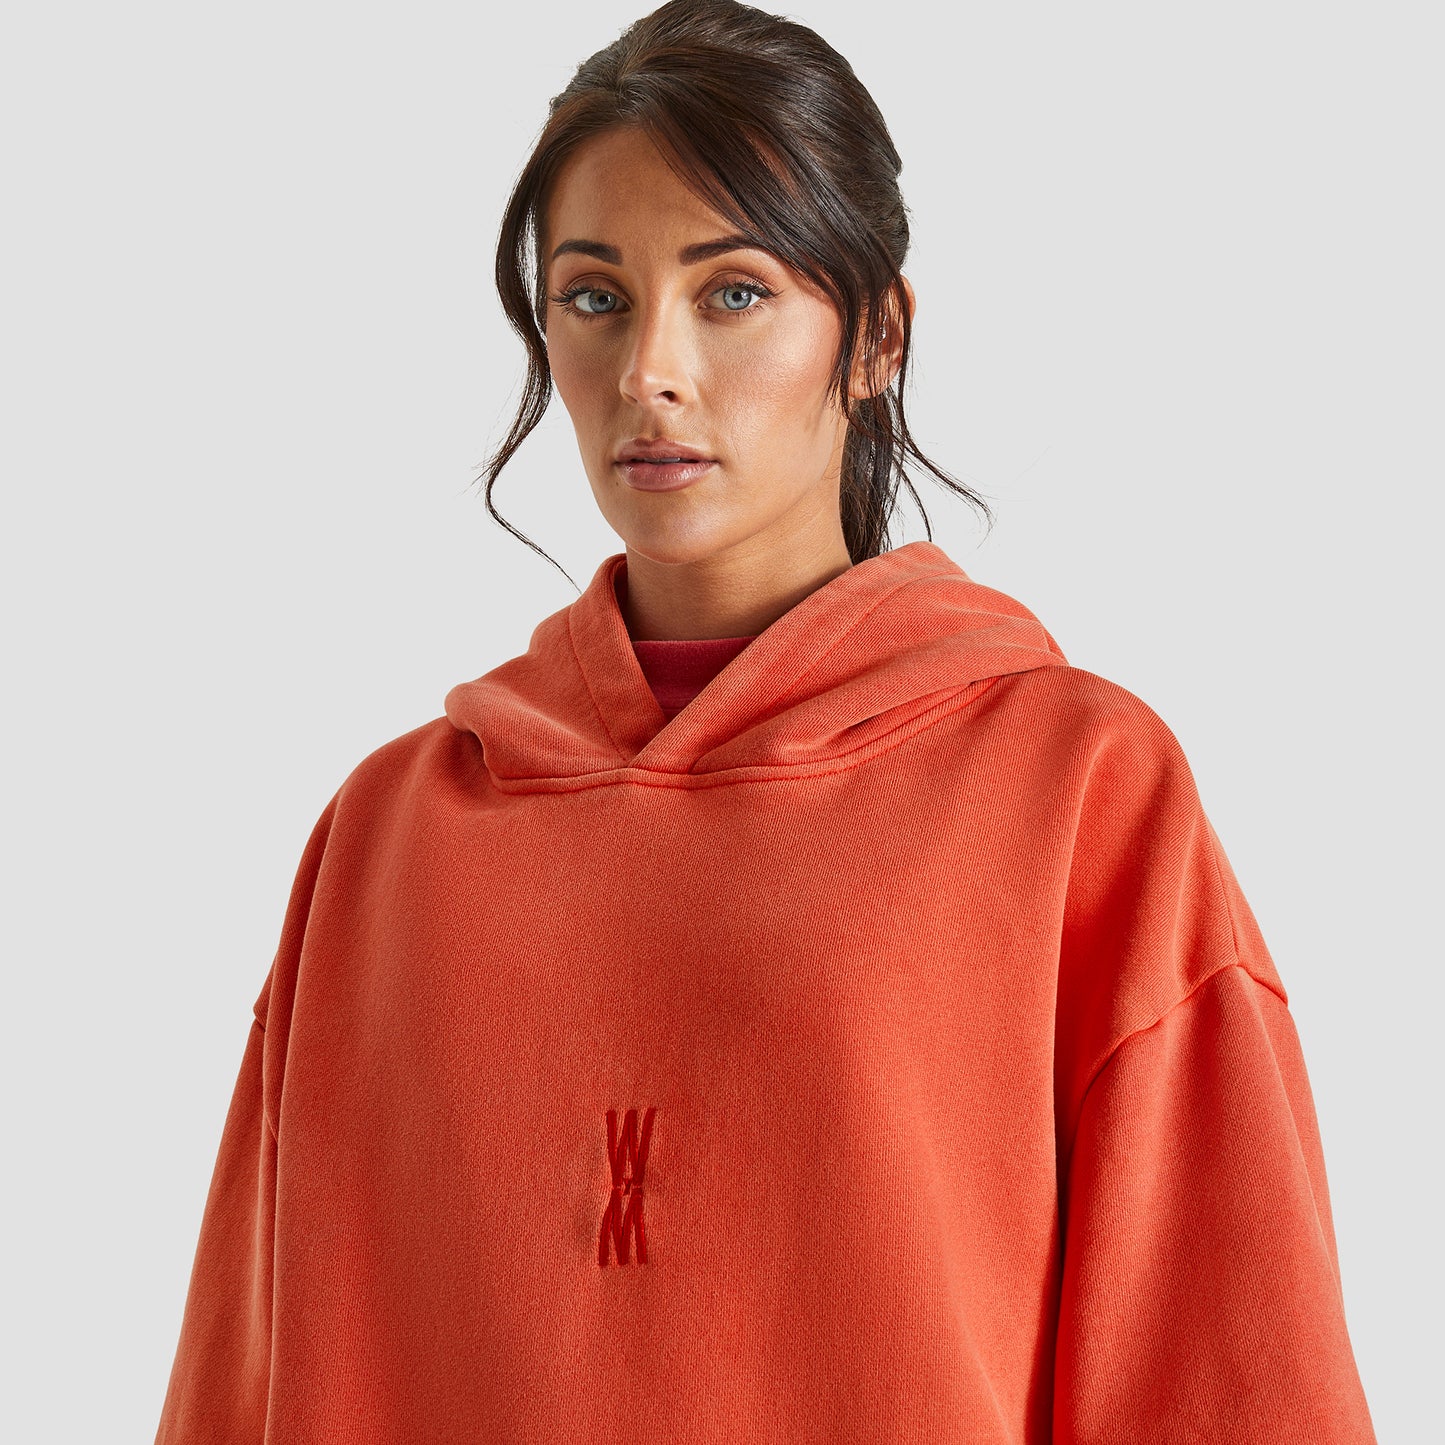 WXM Oversized Hoodie - Washed Red